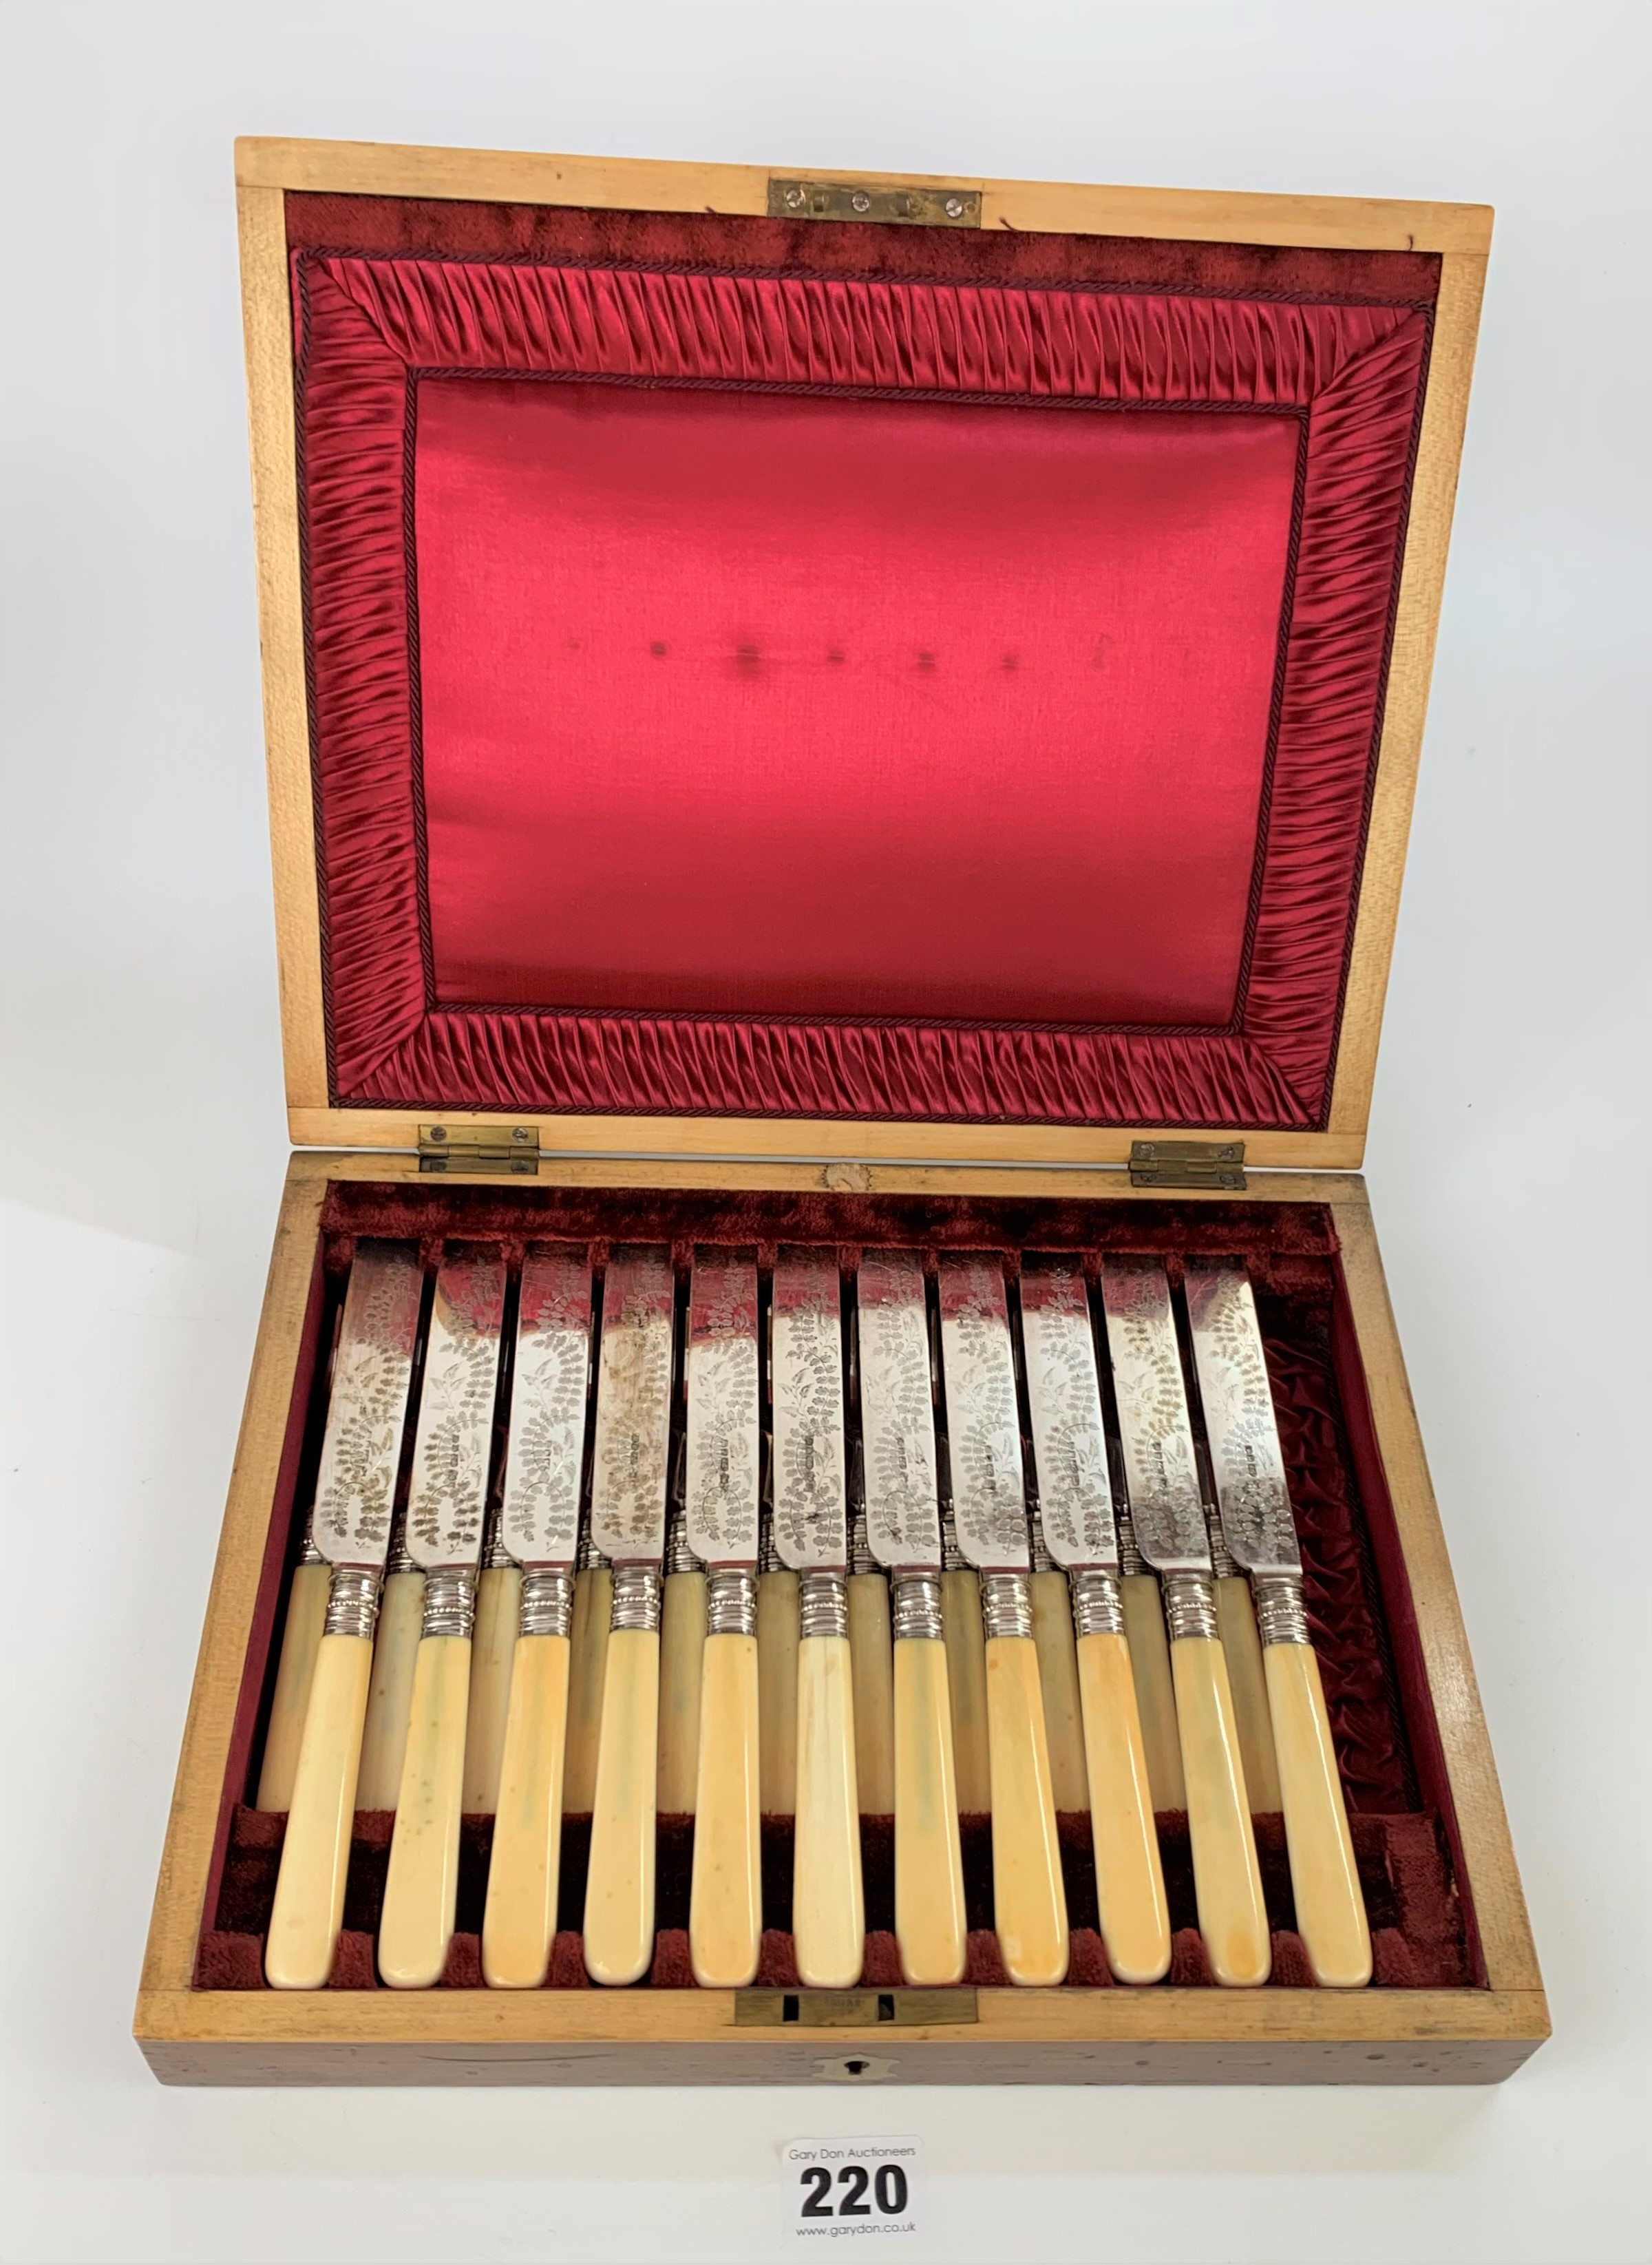 Cased canteen of 11 engraved plated and bone handled knives and 11 forks (1 knife and 1 fork